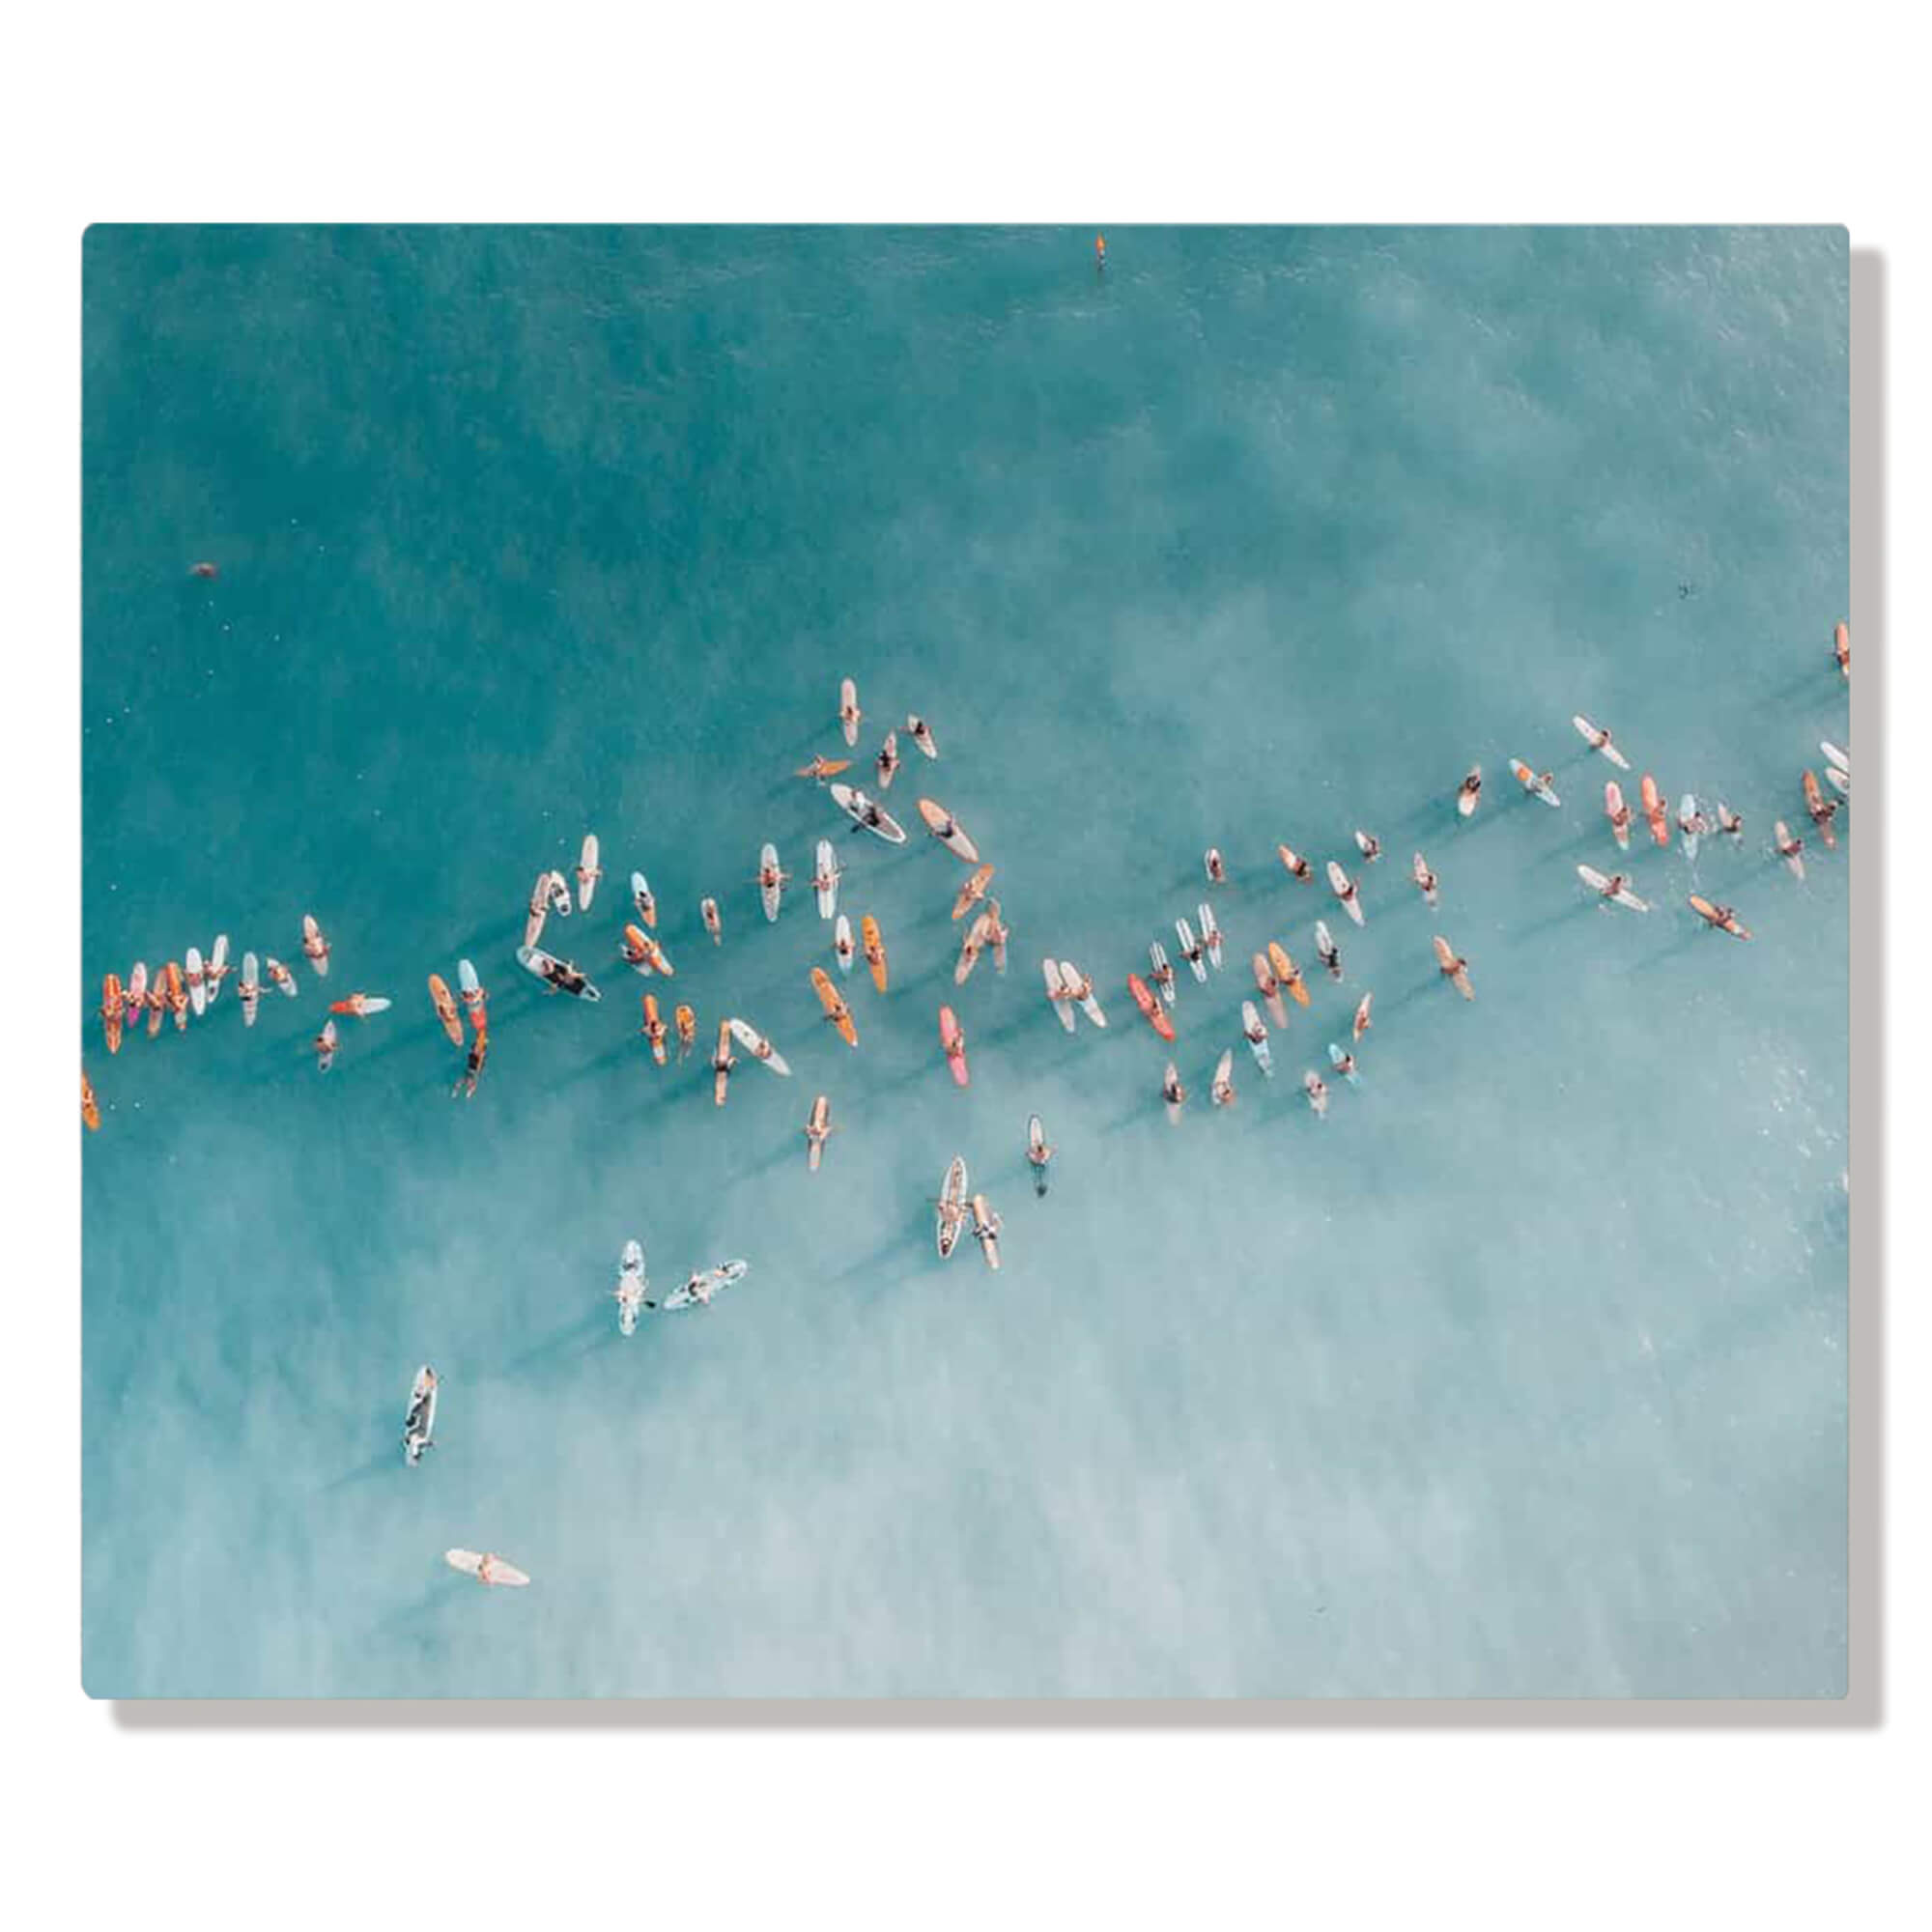 A metal art print of a large group of surfers paddling out to catch waves by Hawaii artist Bree Poort